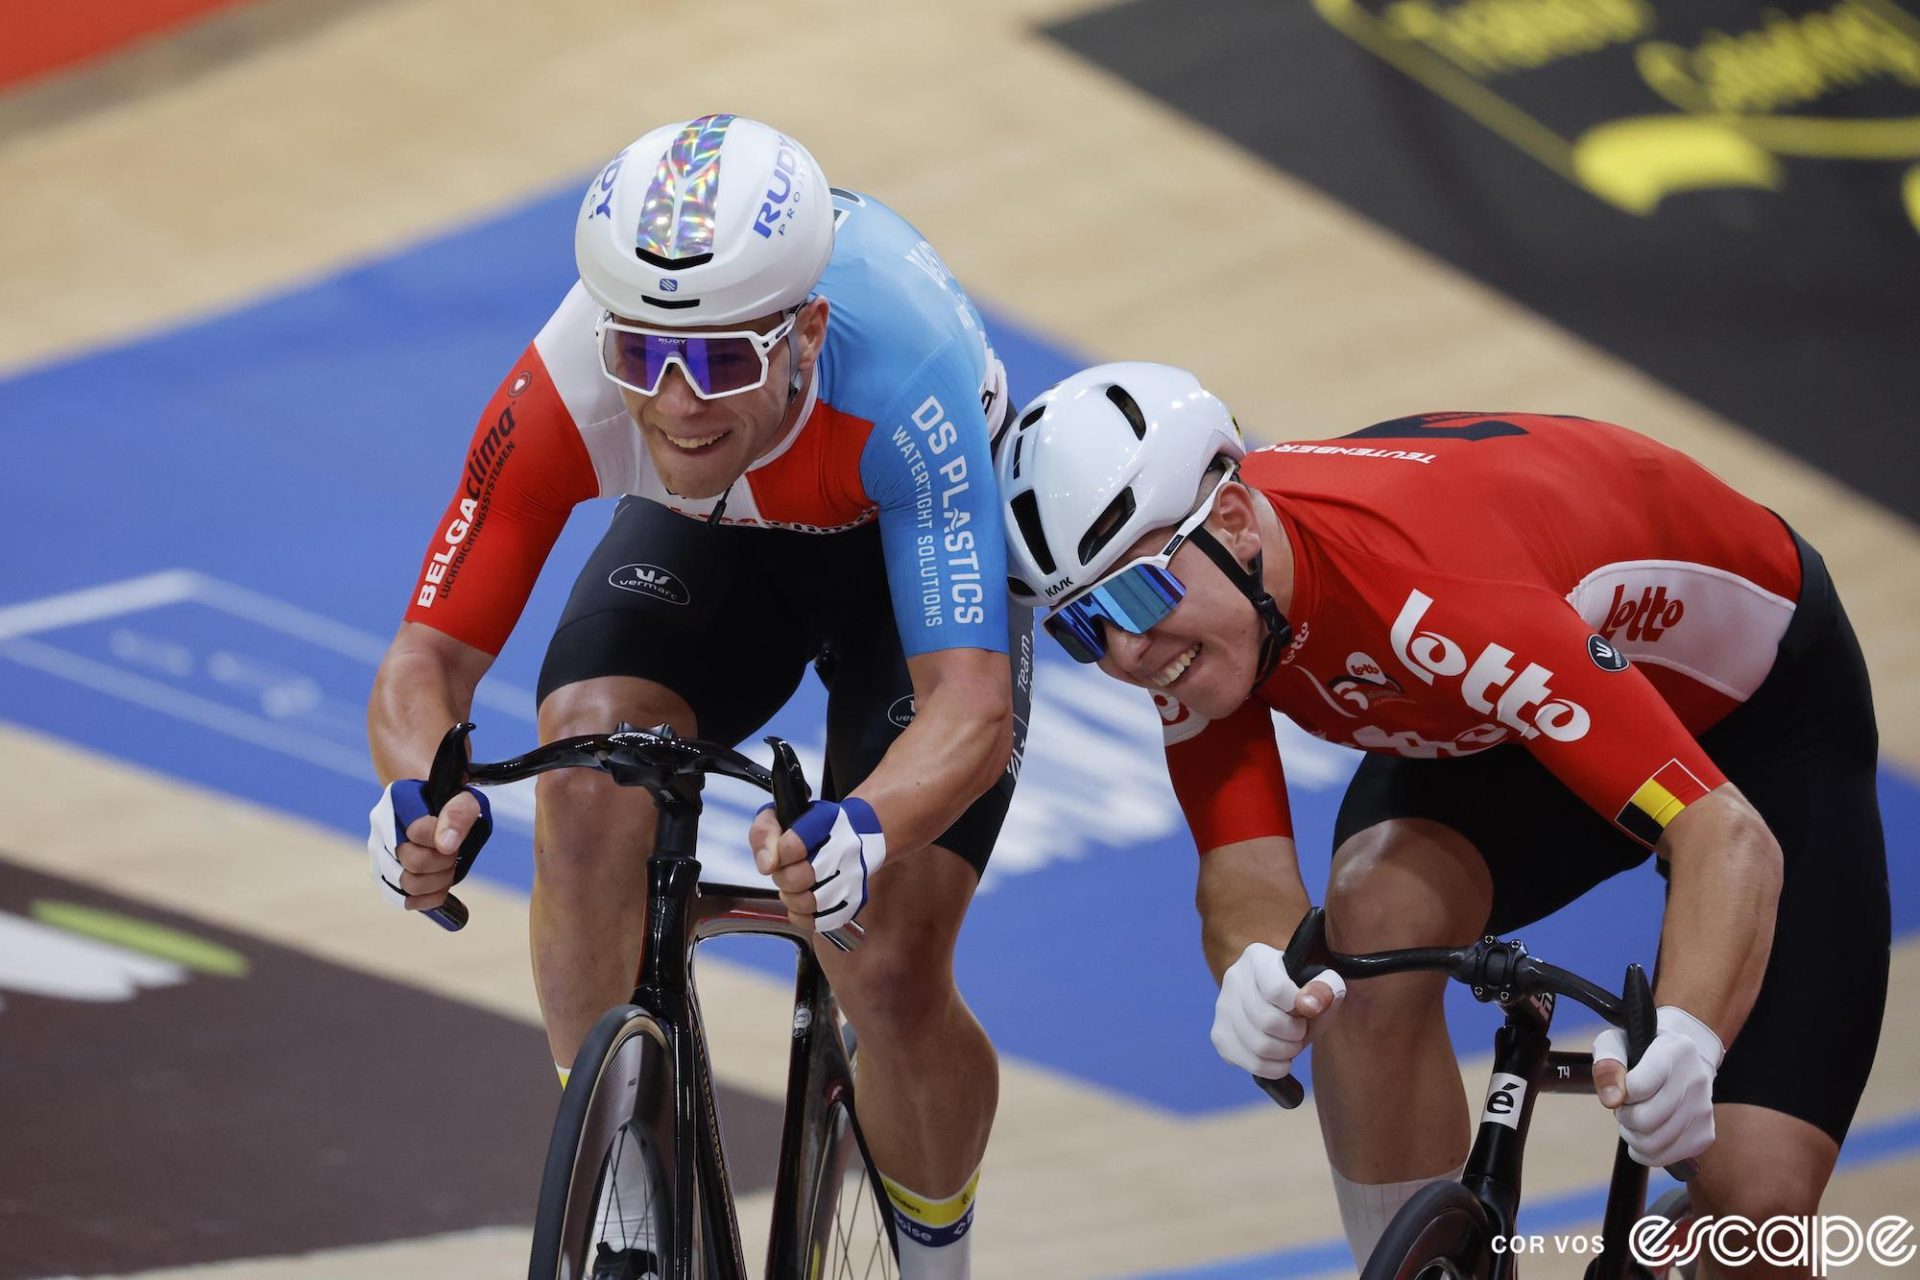 Jules Hester leans his head against Gianluca Pollefliet's shoulder during a race as the two are in each other's space.